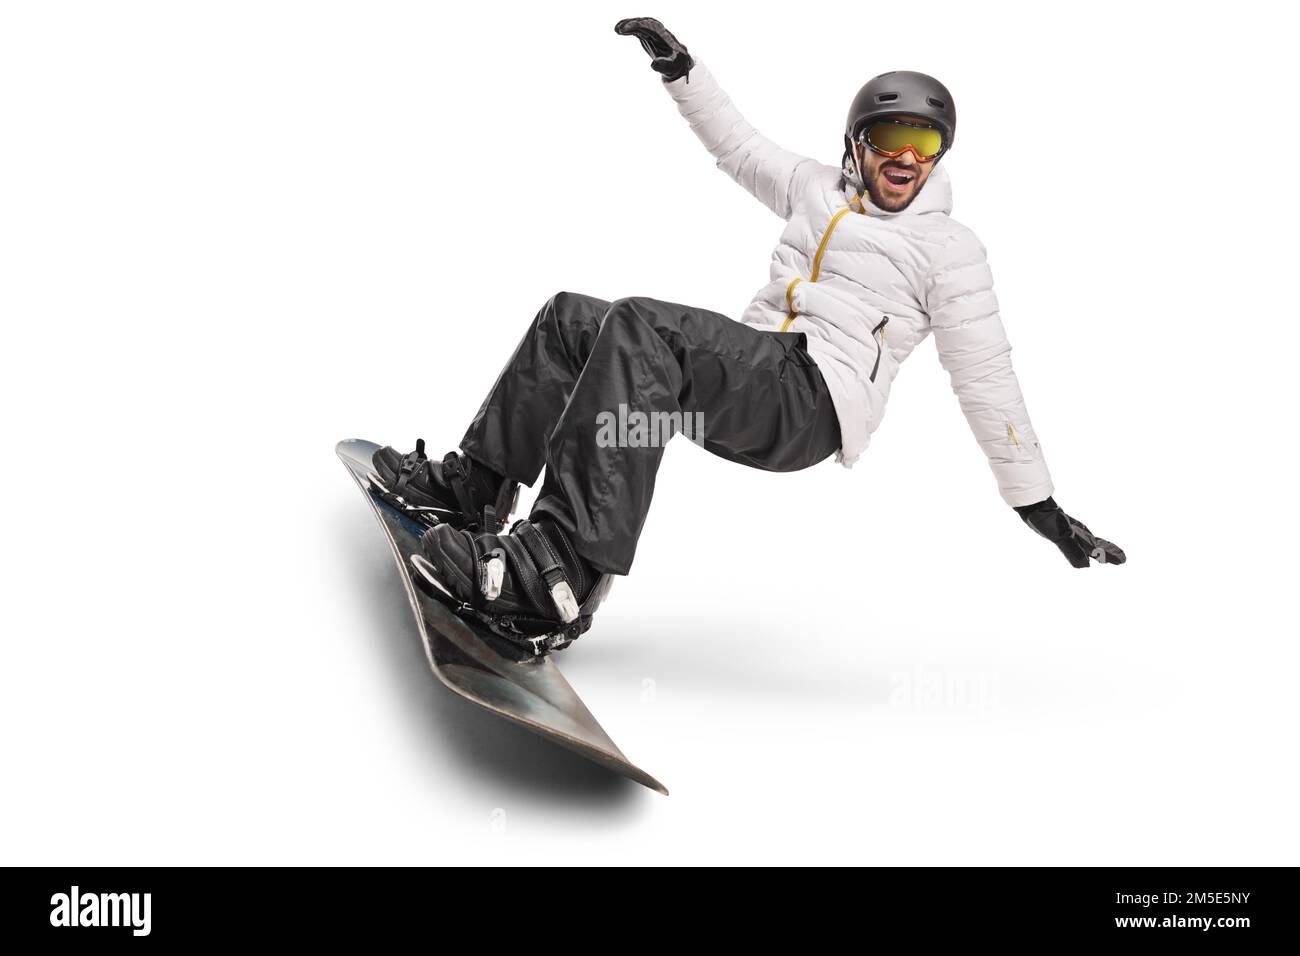 Guy riding a snowboard with helmet and goggles isolated on white background Stock Photo